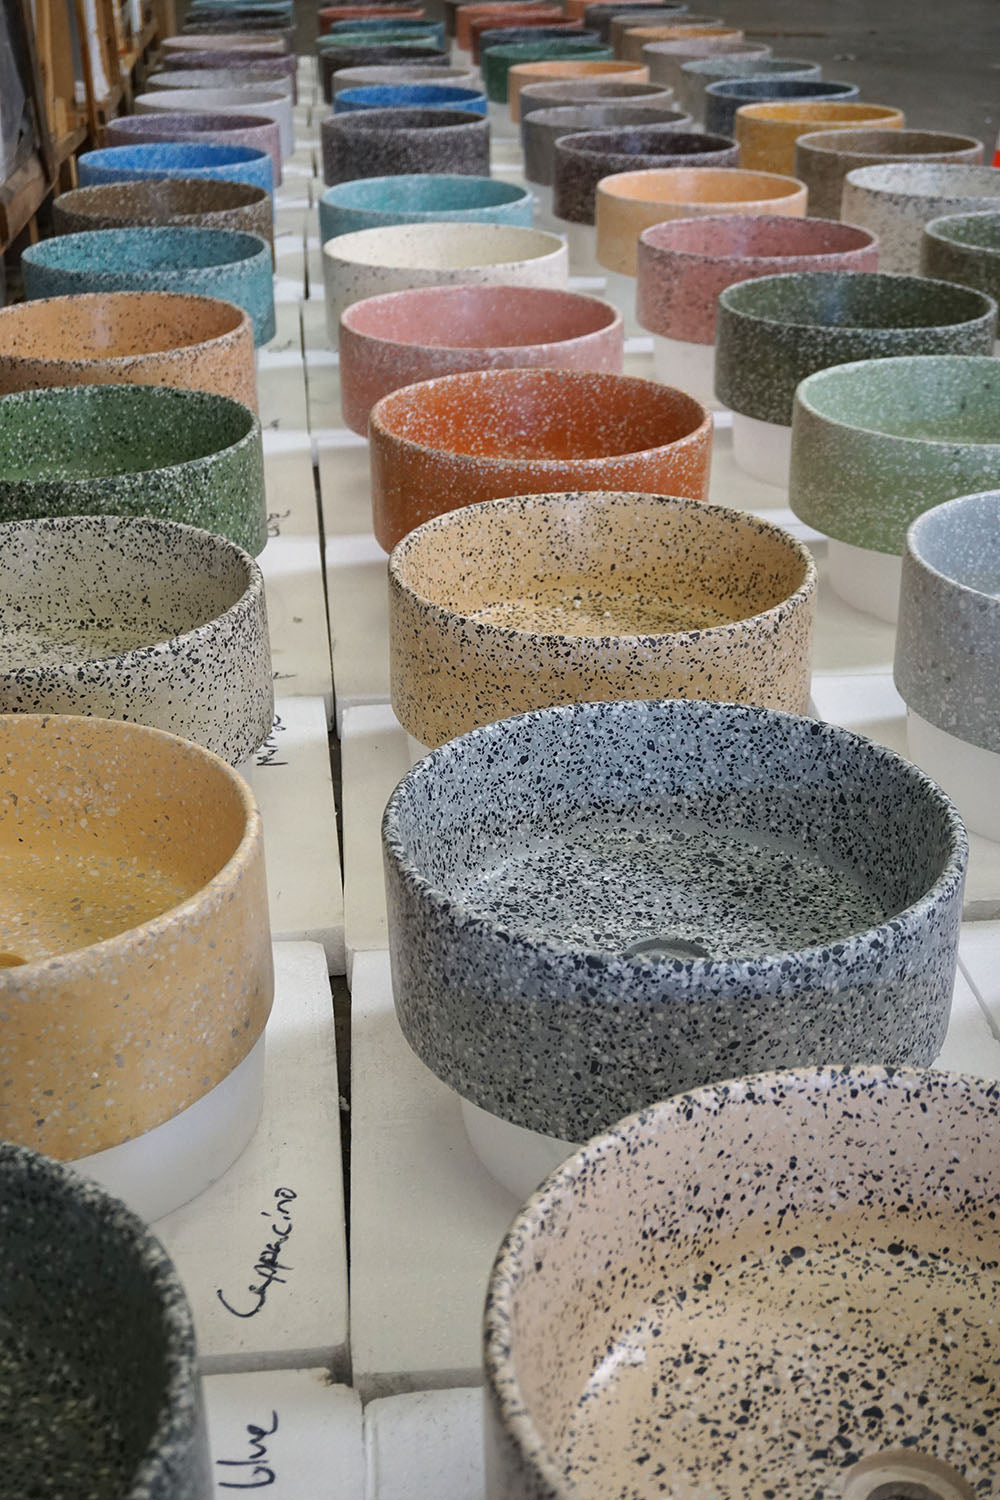 Concrete terrazzo sinks in lots of different colours